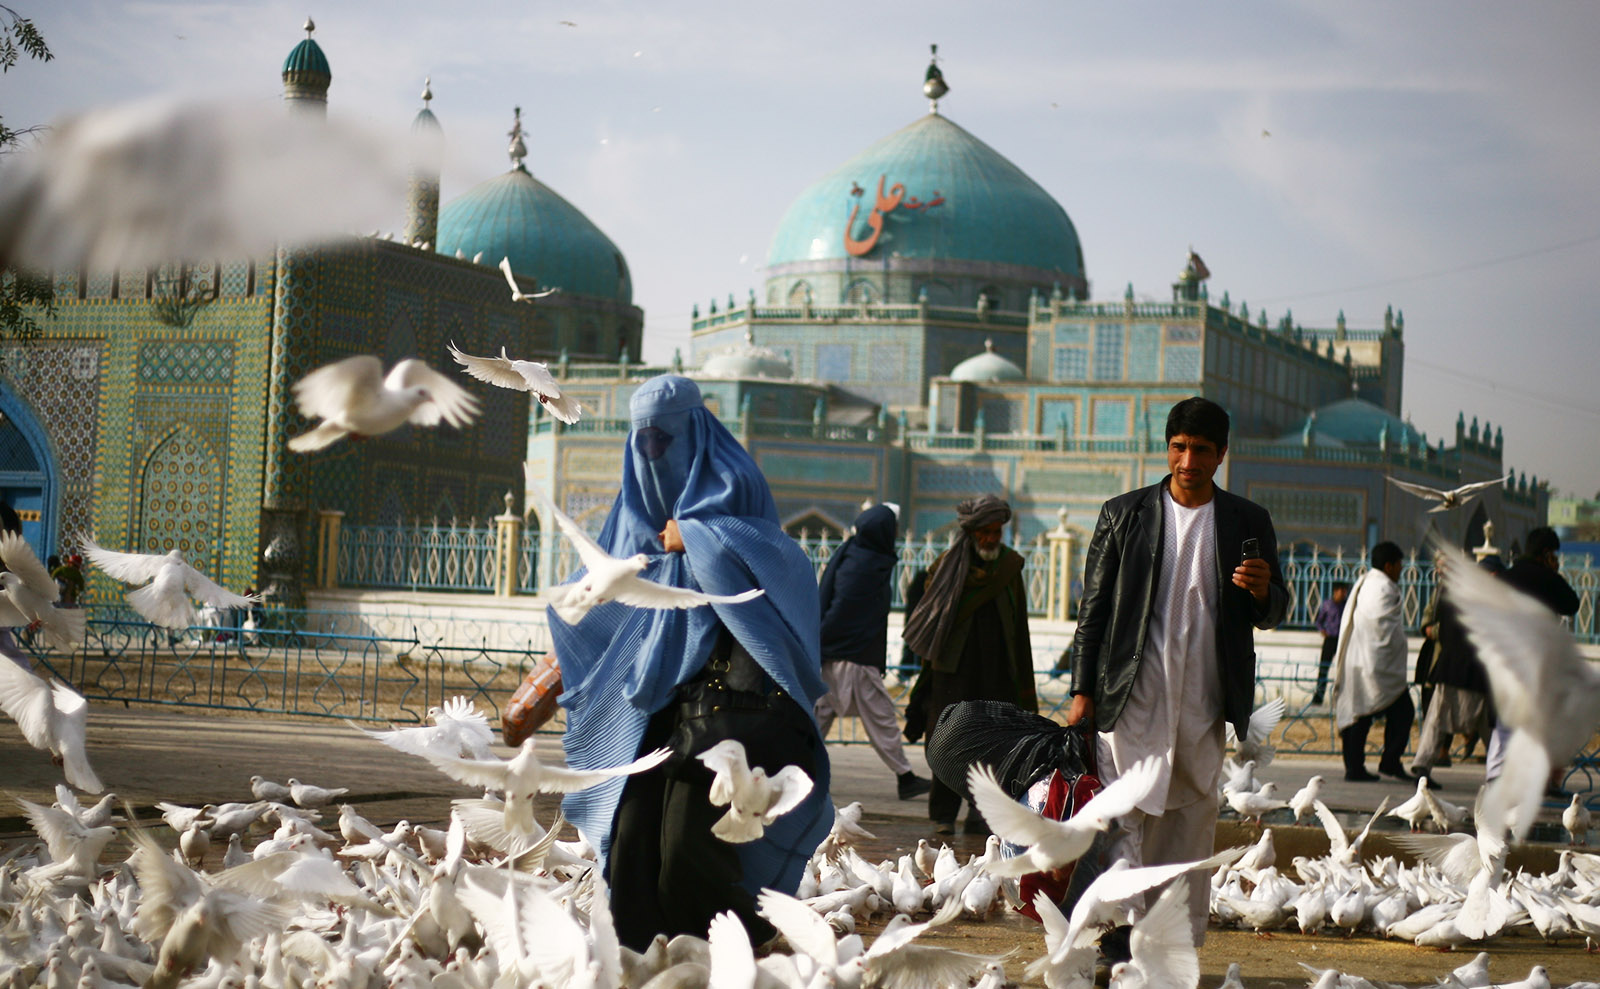 women wearing a blue veil in a square surrounded by white doves with a turquoise mosque in the background